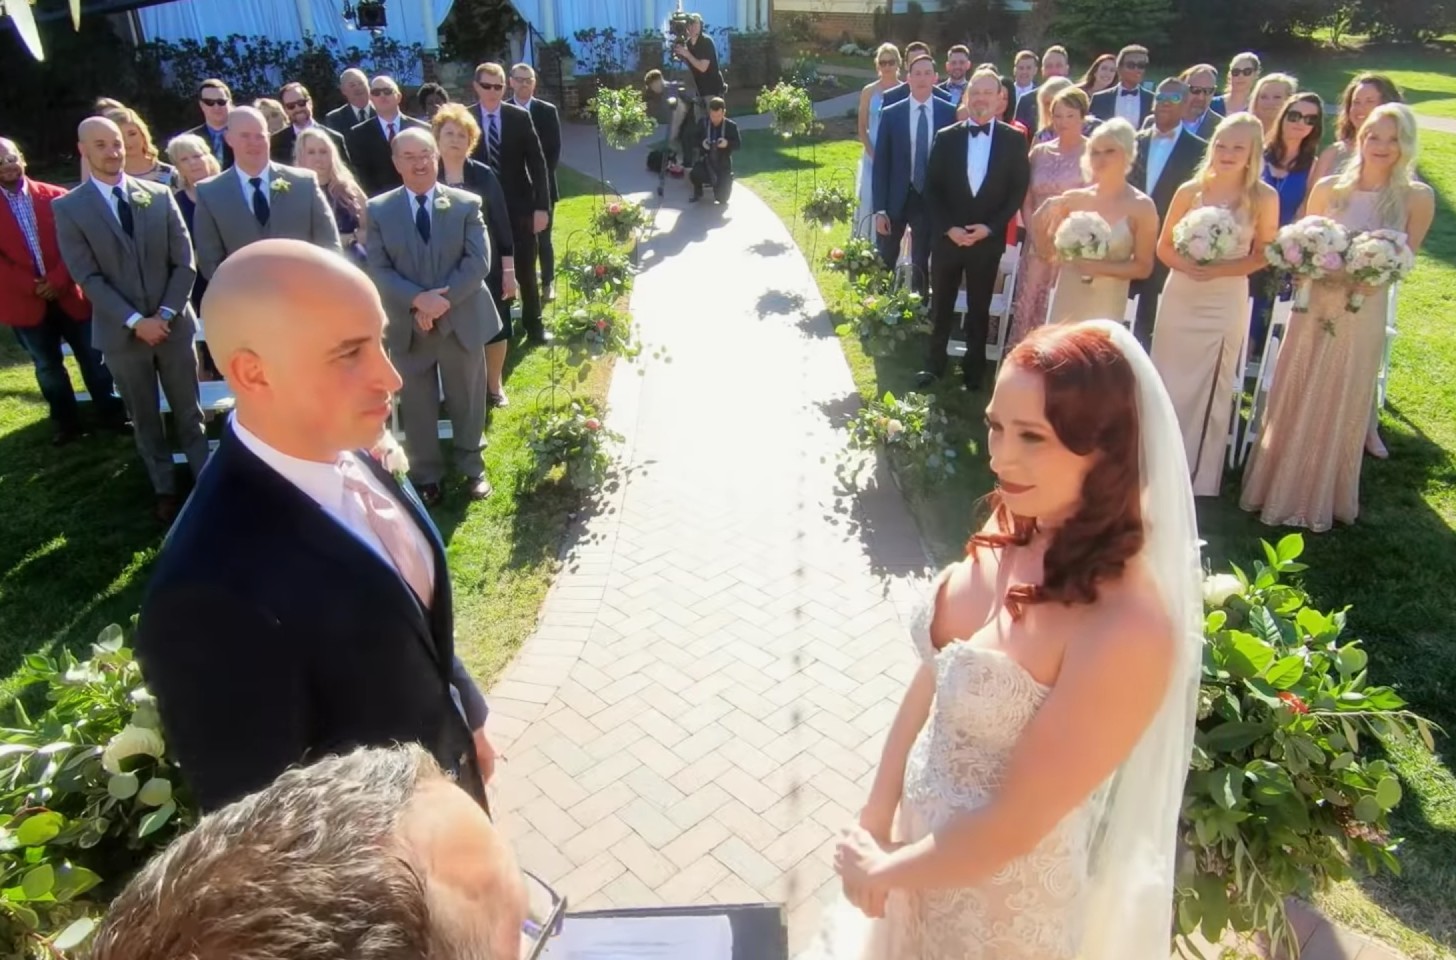 Elizabeth and Jamie from 'Married At First Sight" exchanging their vows in front of a crowd.